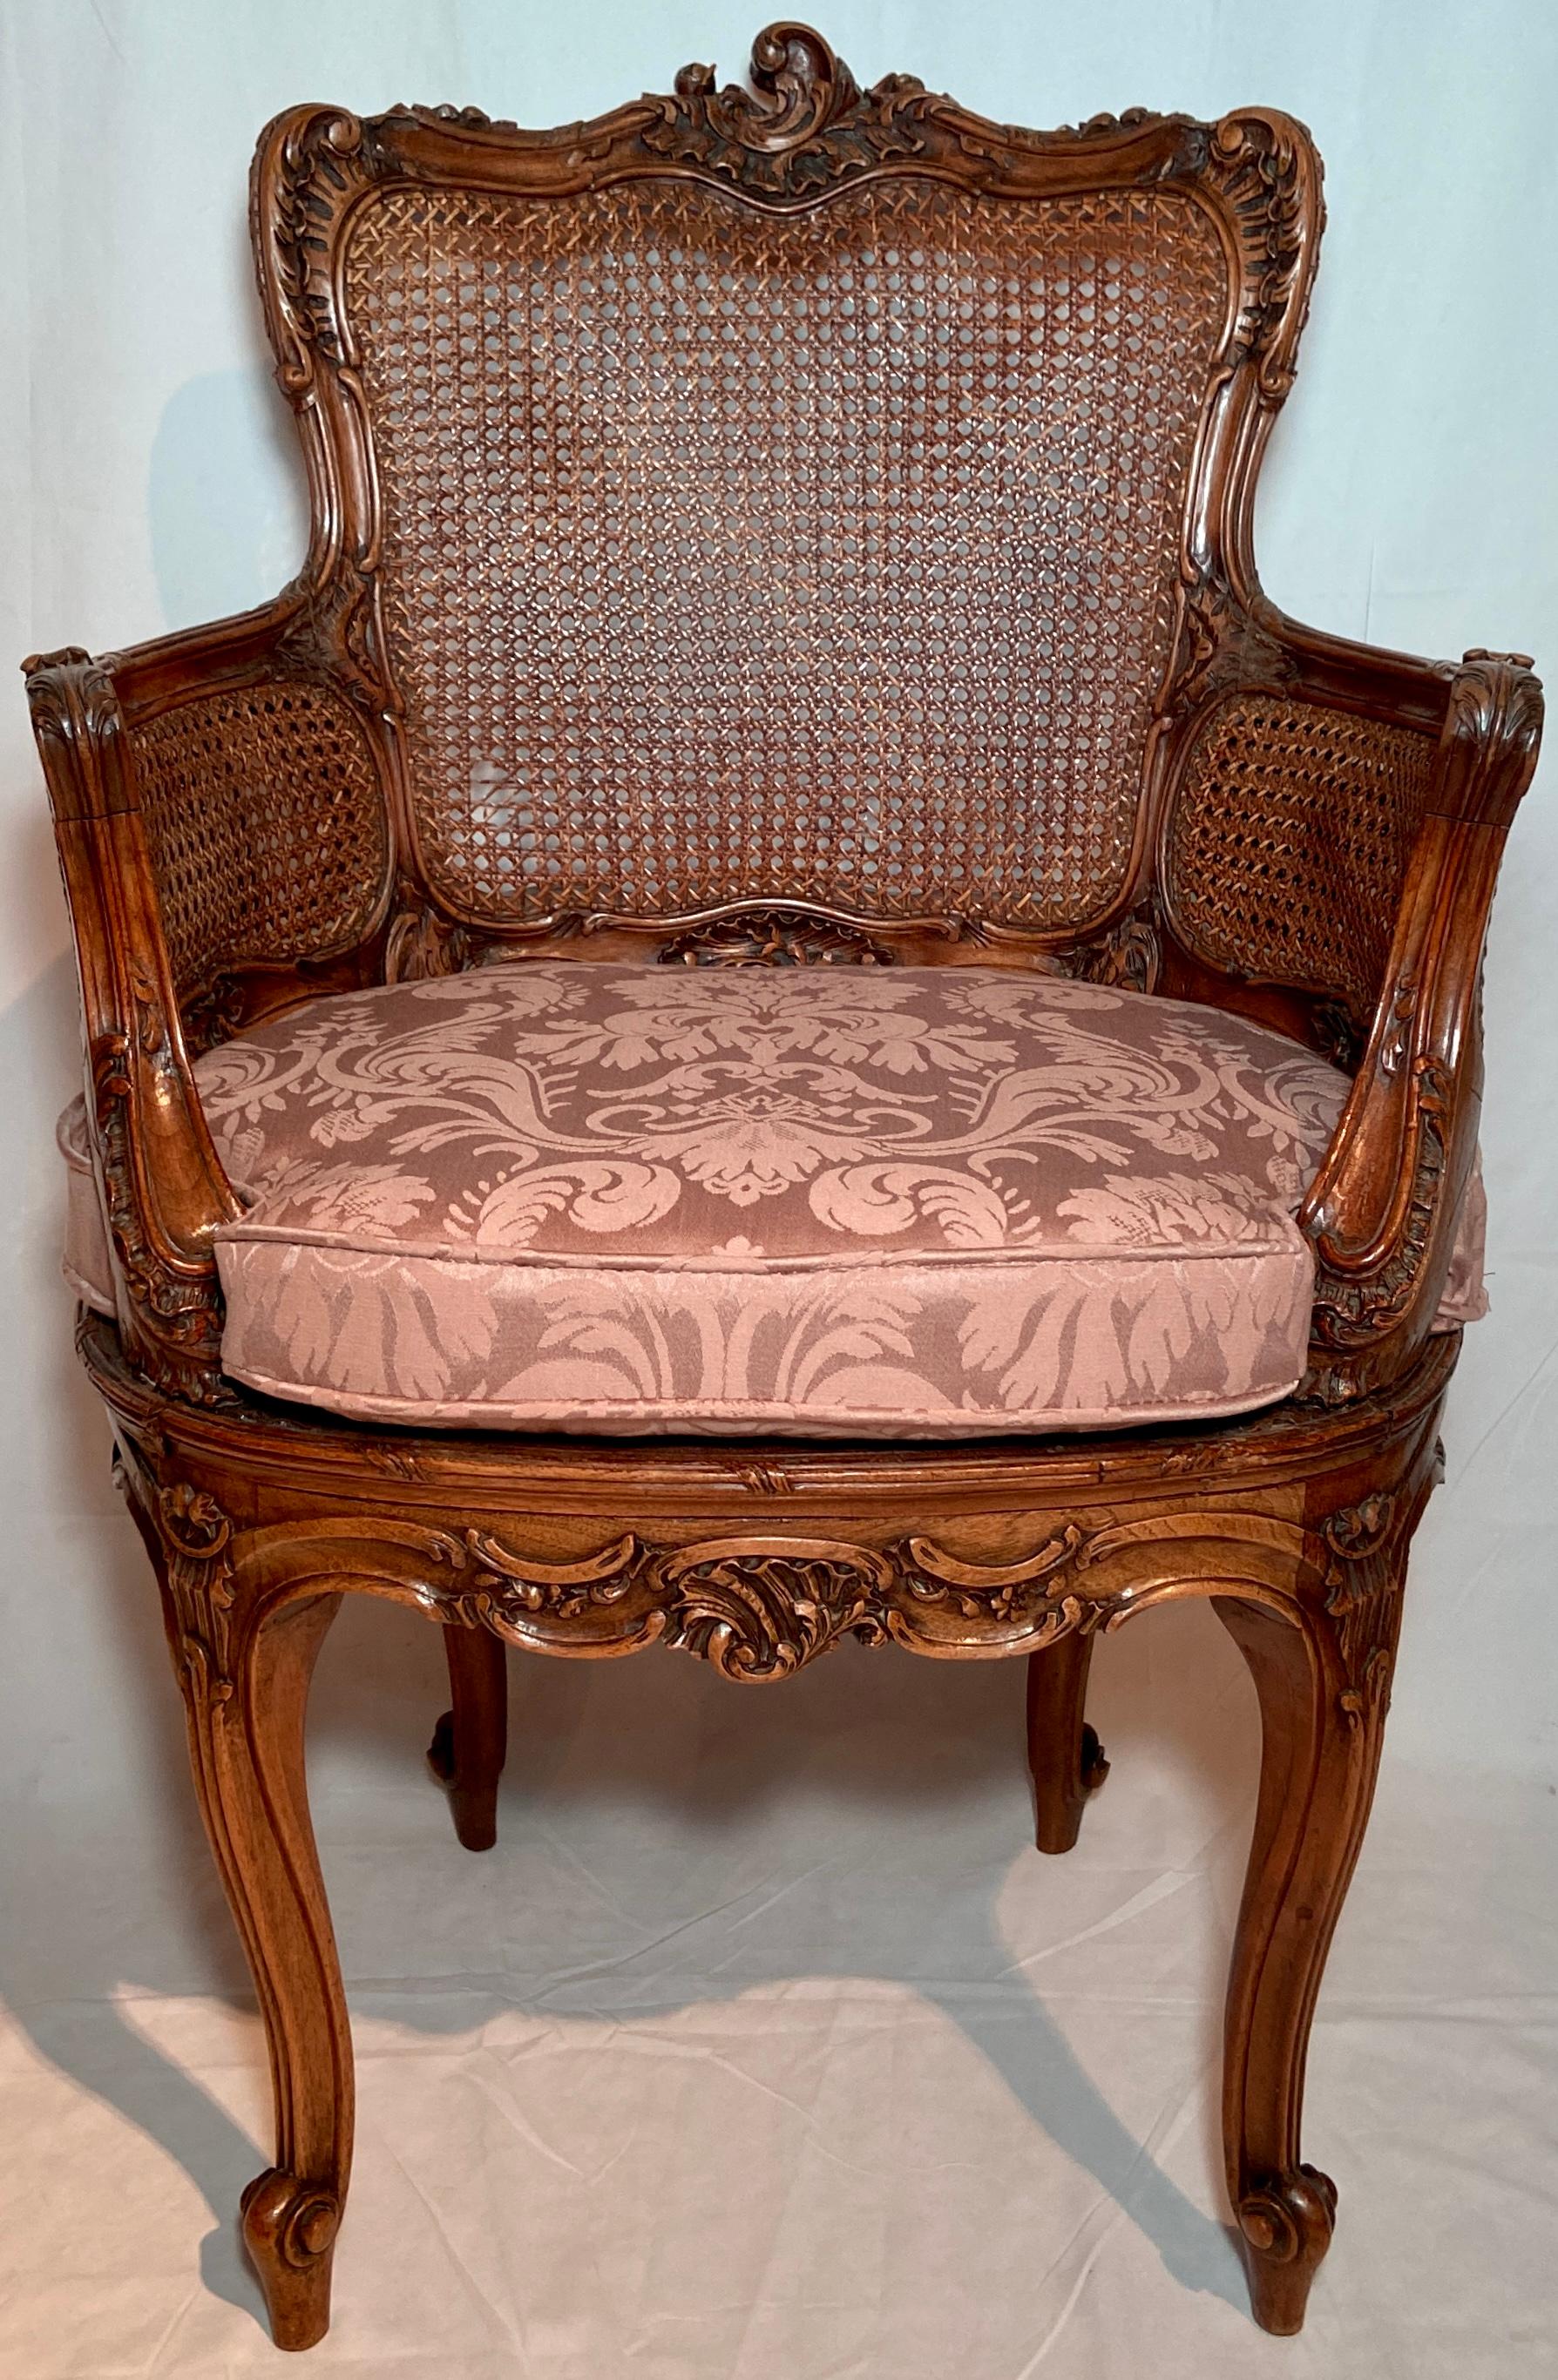 Pair antique French walnut and cane arm chairs with carved backs and pink silk upholstered cushions, circa 1890s.